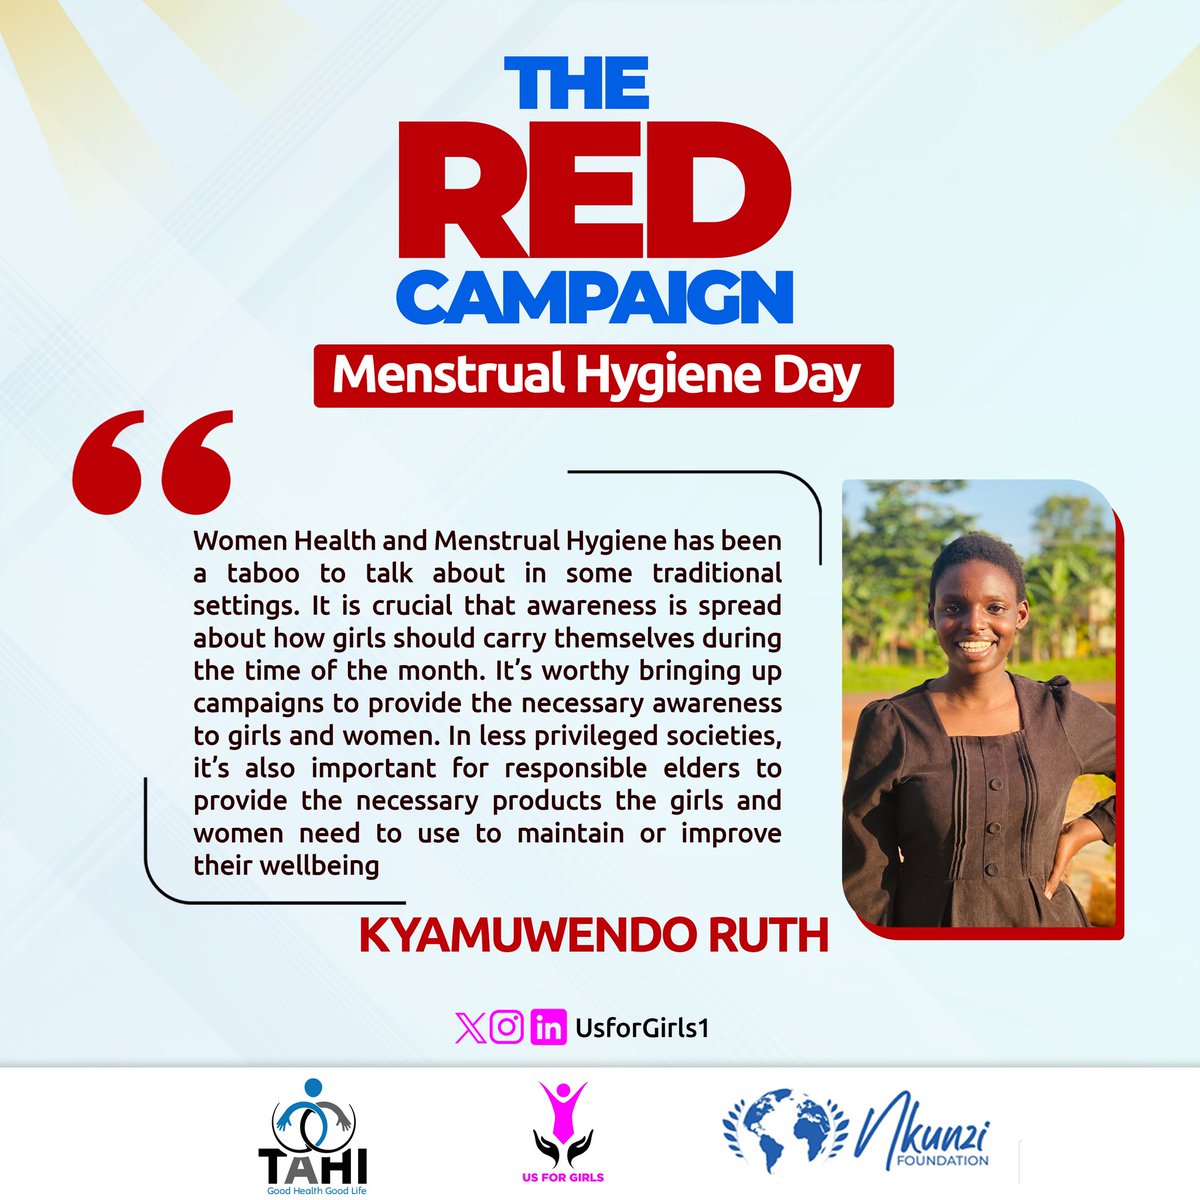 #RedCampaign

For so long, women and menstrual health issues have been taboo to discuss in most of our societies and @RuthKyamuwendo implores us all to increase awareness around periods & also involve leaders to  provide the necessary period products girls need.
#EndPeriodPoverty